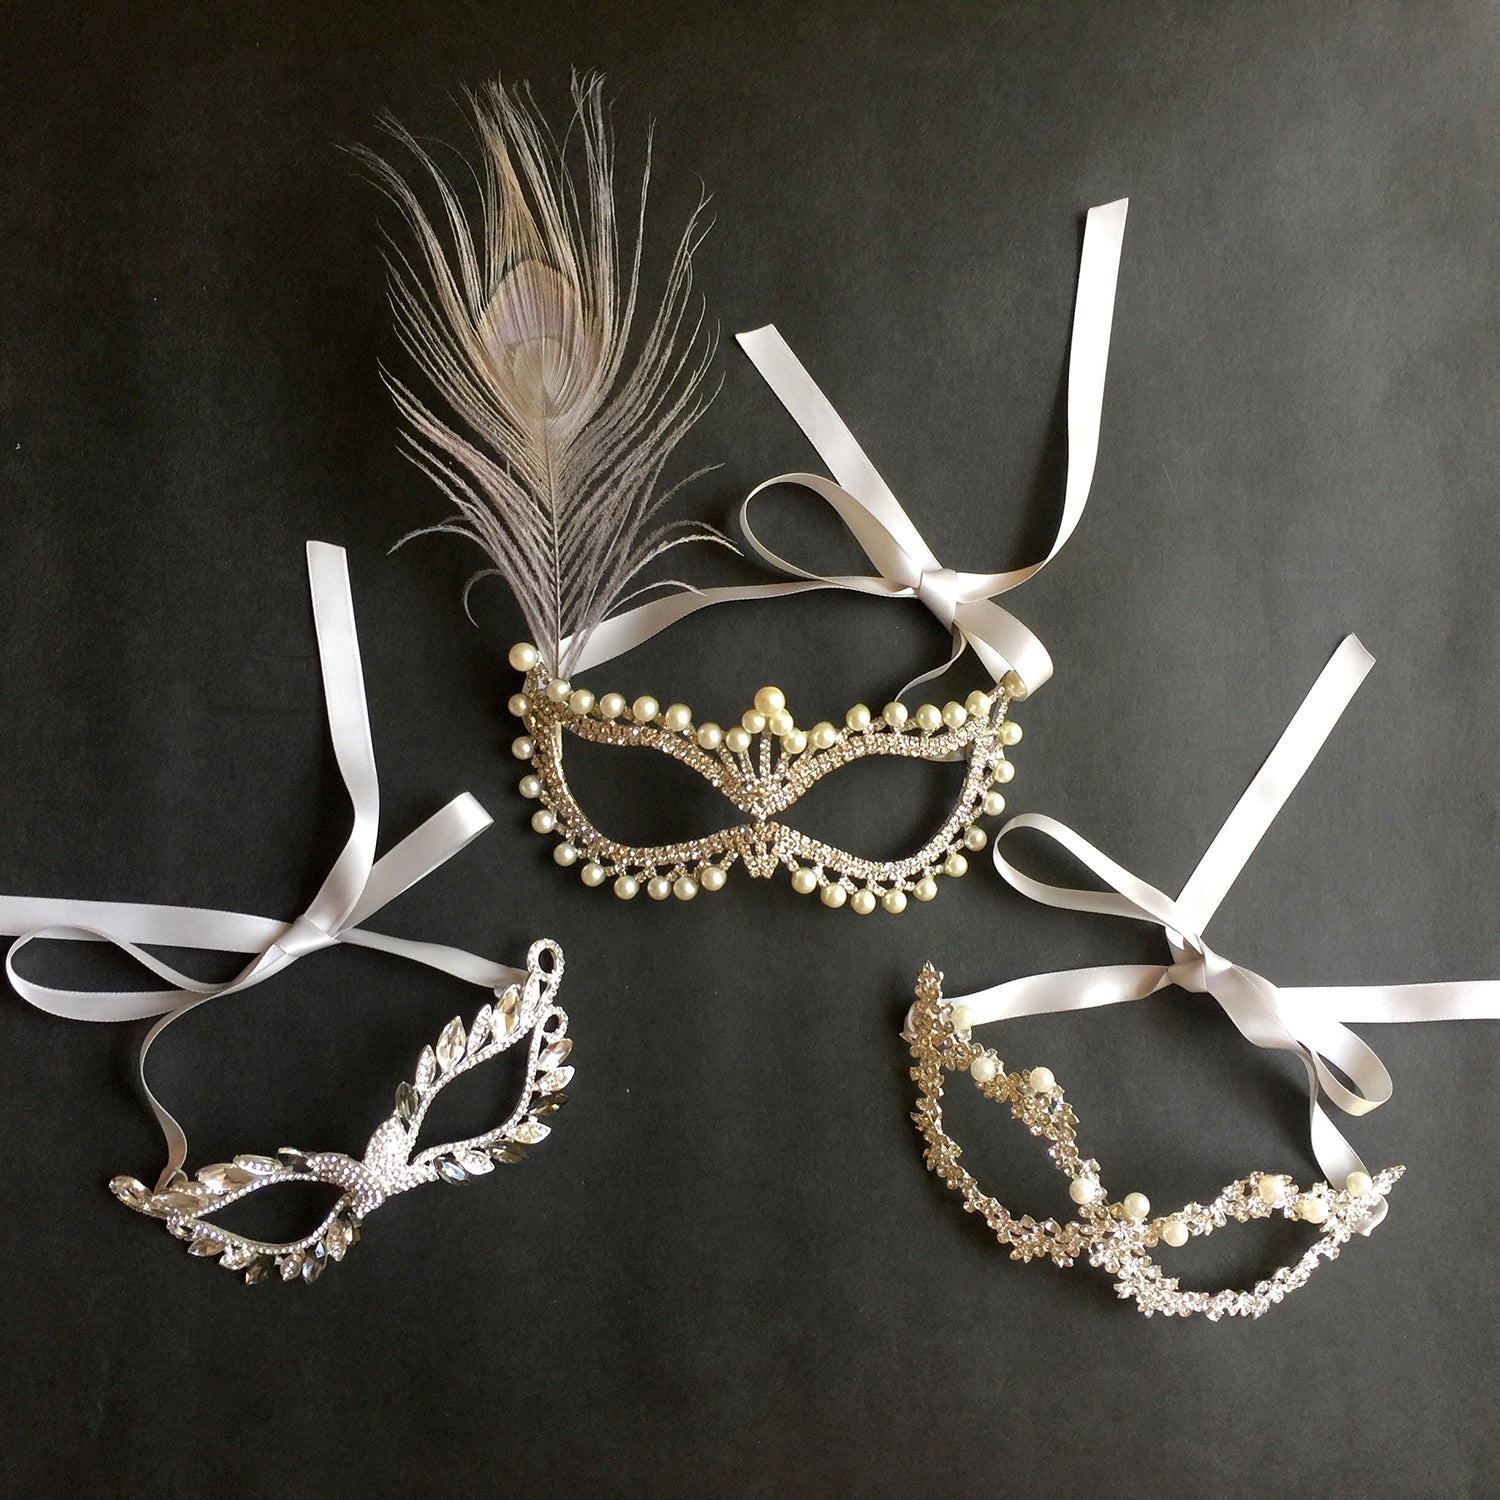 Custom party mask order for masquerade party - Curtain Road @ onecurtainroad.com